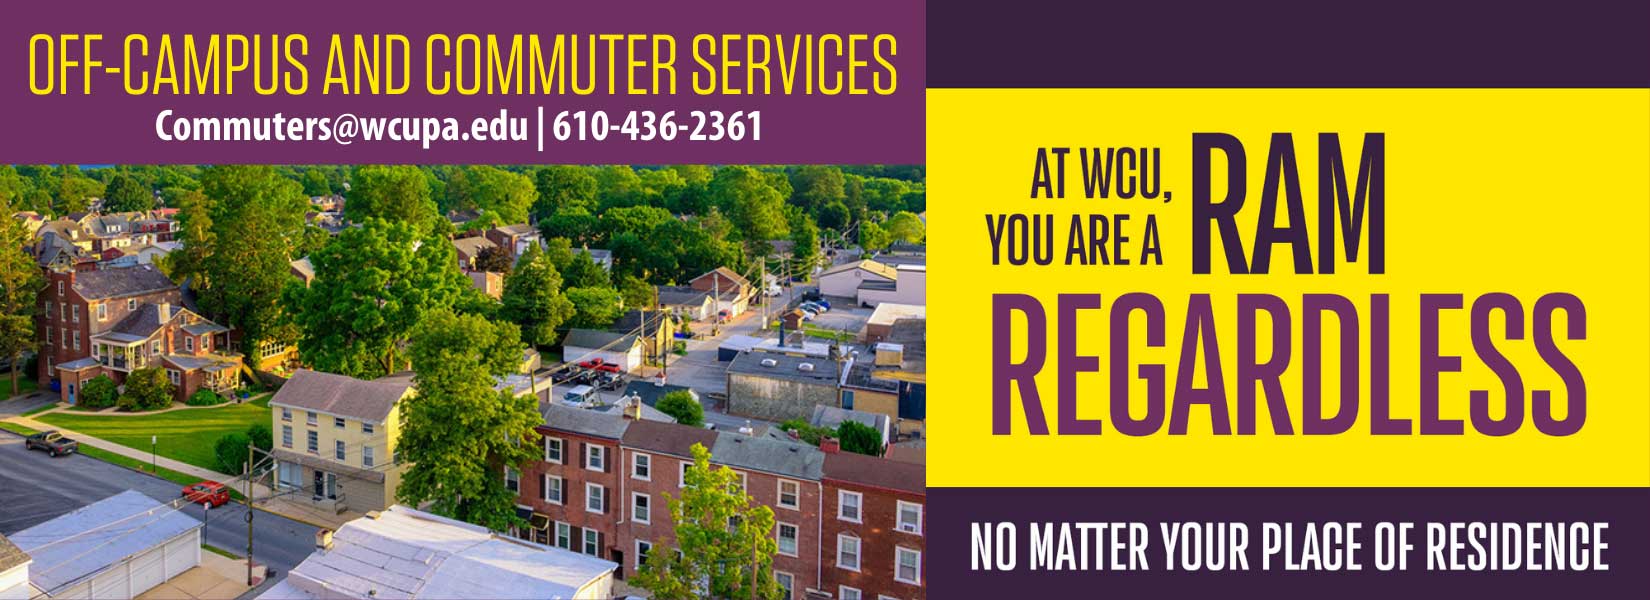 Off Campus COmmuters - 6104362361 - Commuters@wcupa.edu - At WCU You are a Ram Regardless - No matter your place or residence